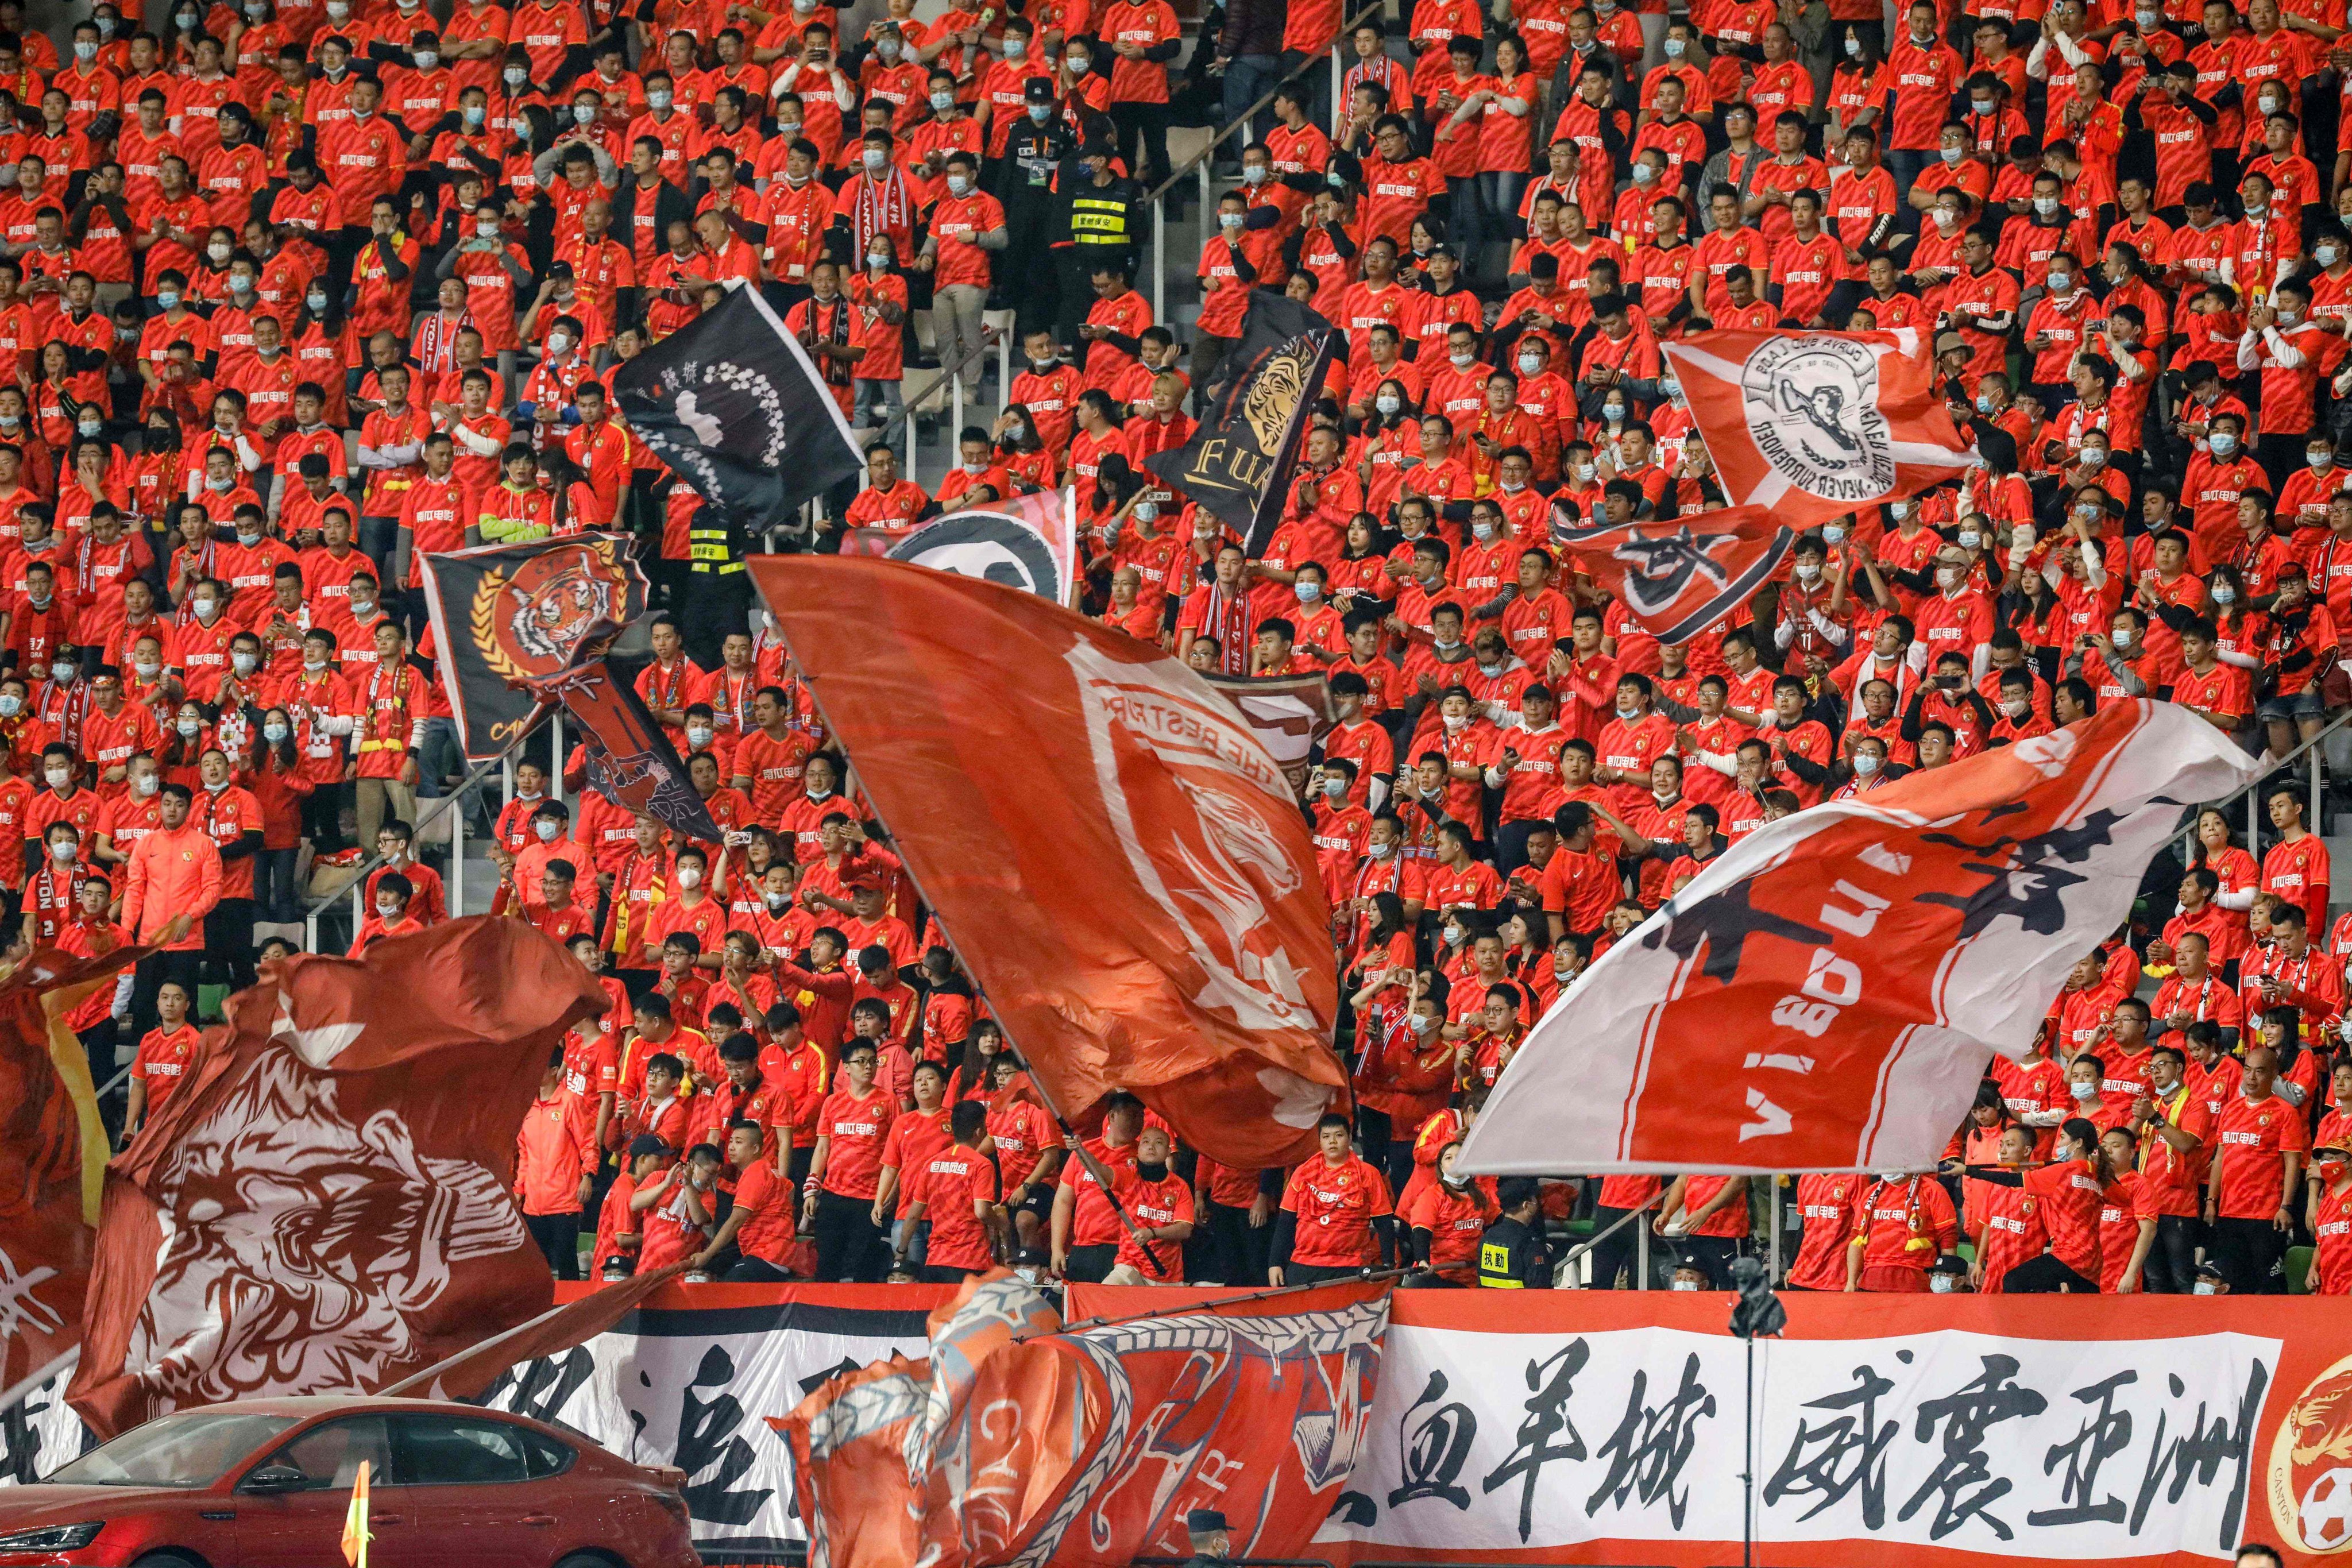 Fans of Guangzhou Evergrande watch 2020’s Chinese Super League final against Jiangsu Suning, before both clubs were beset by financial problems. Photo: AFP